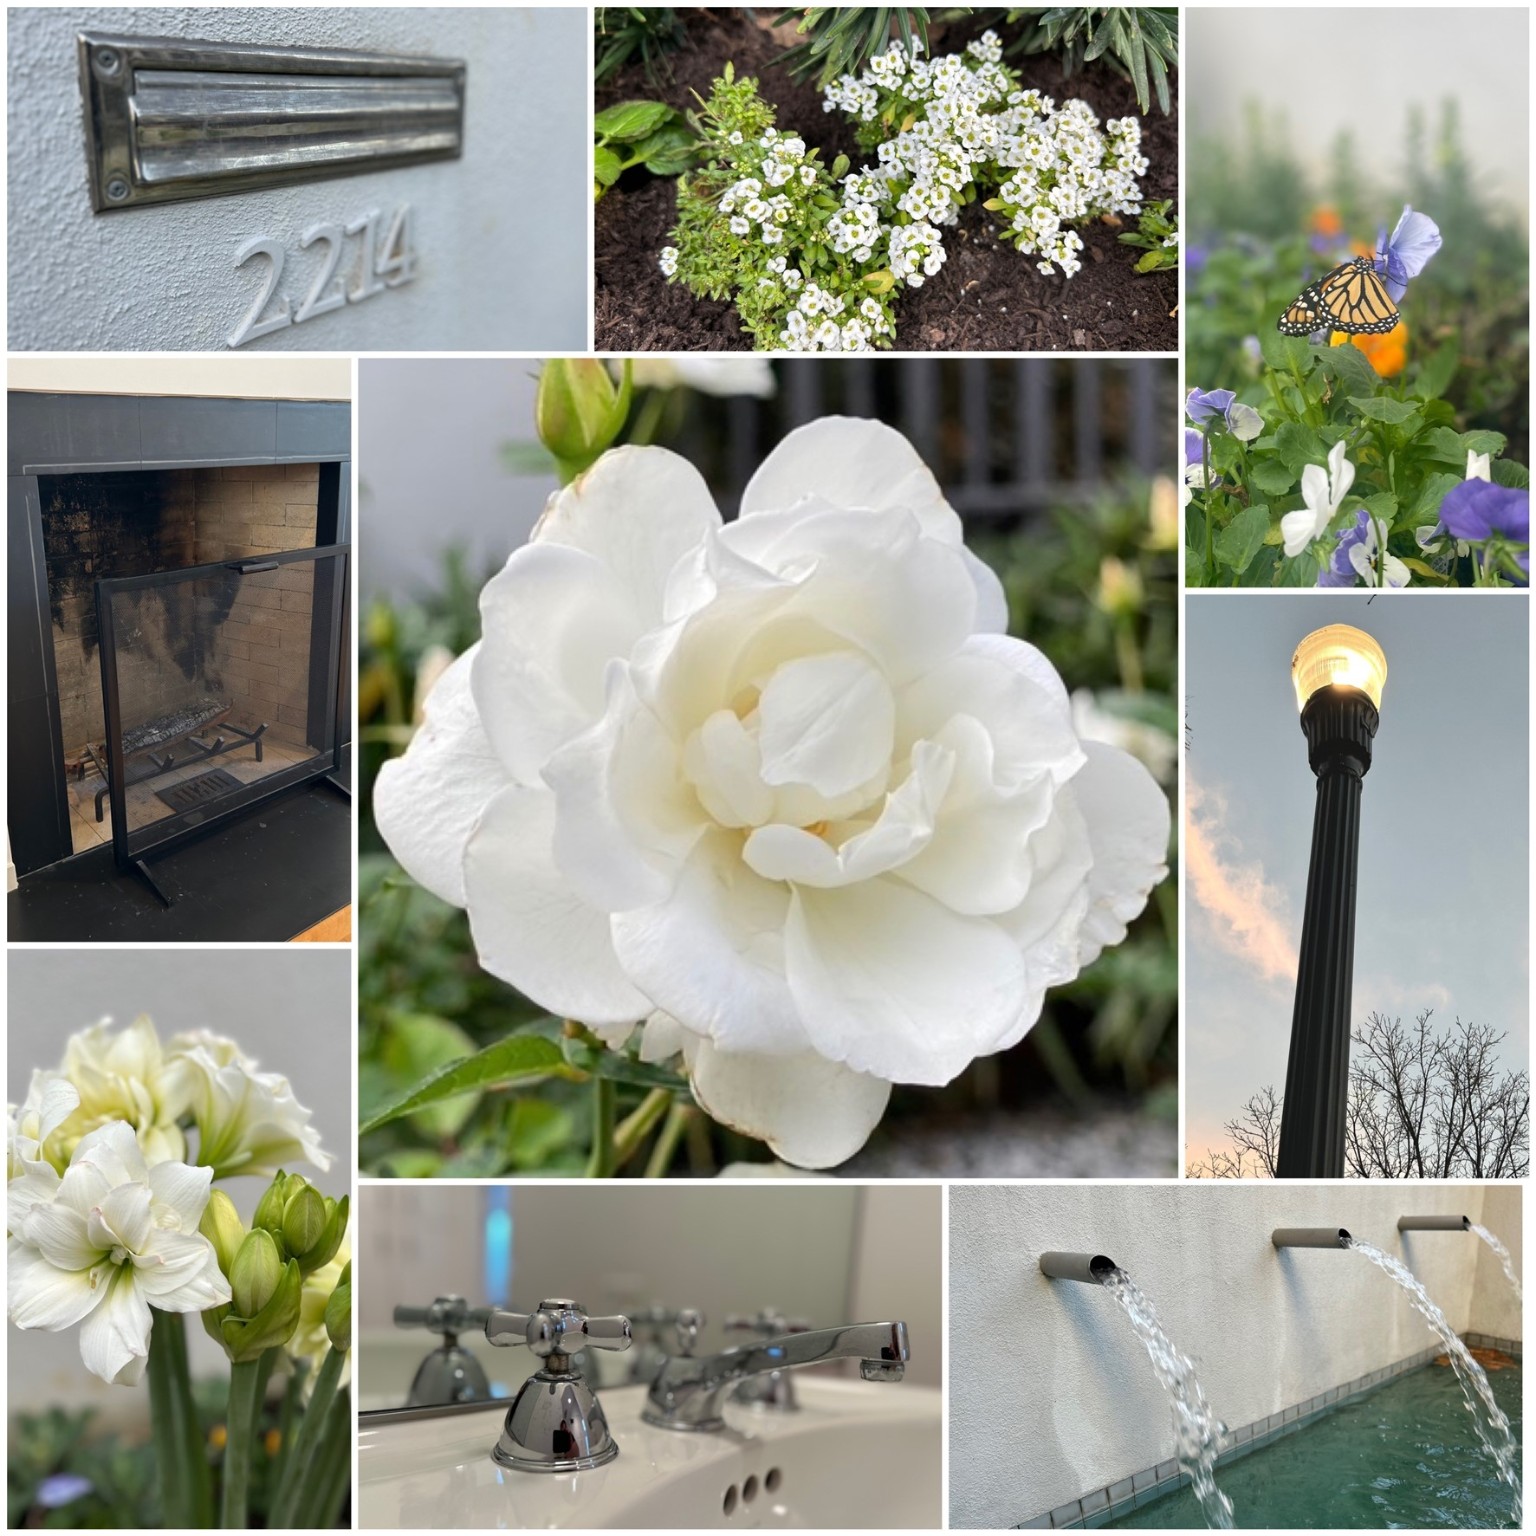 Just some of the many fine features, fixtures and finishes of 2214 Fairview.